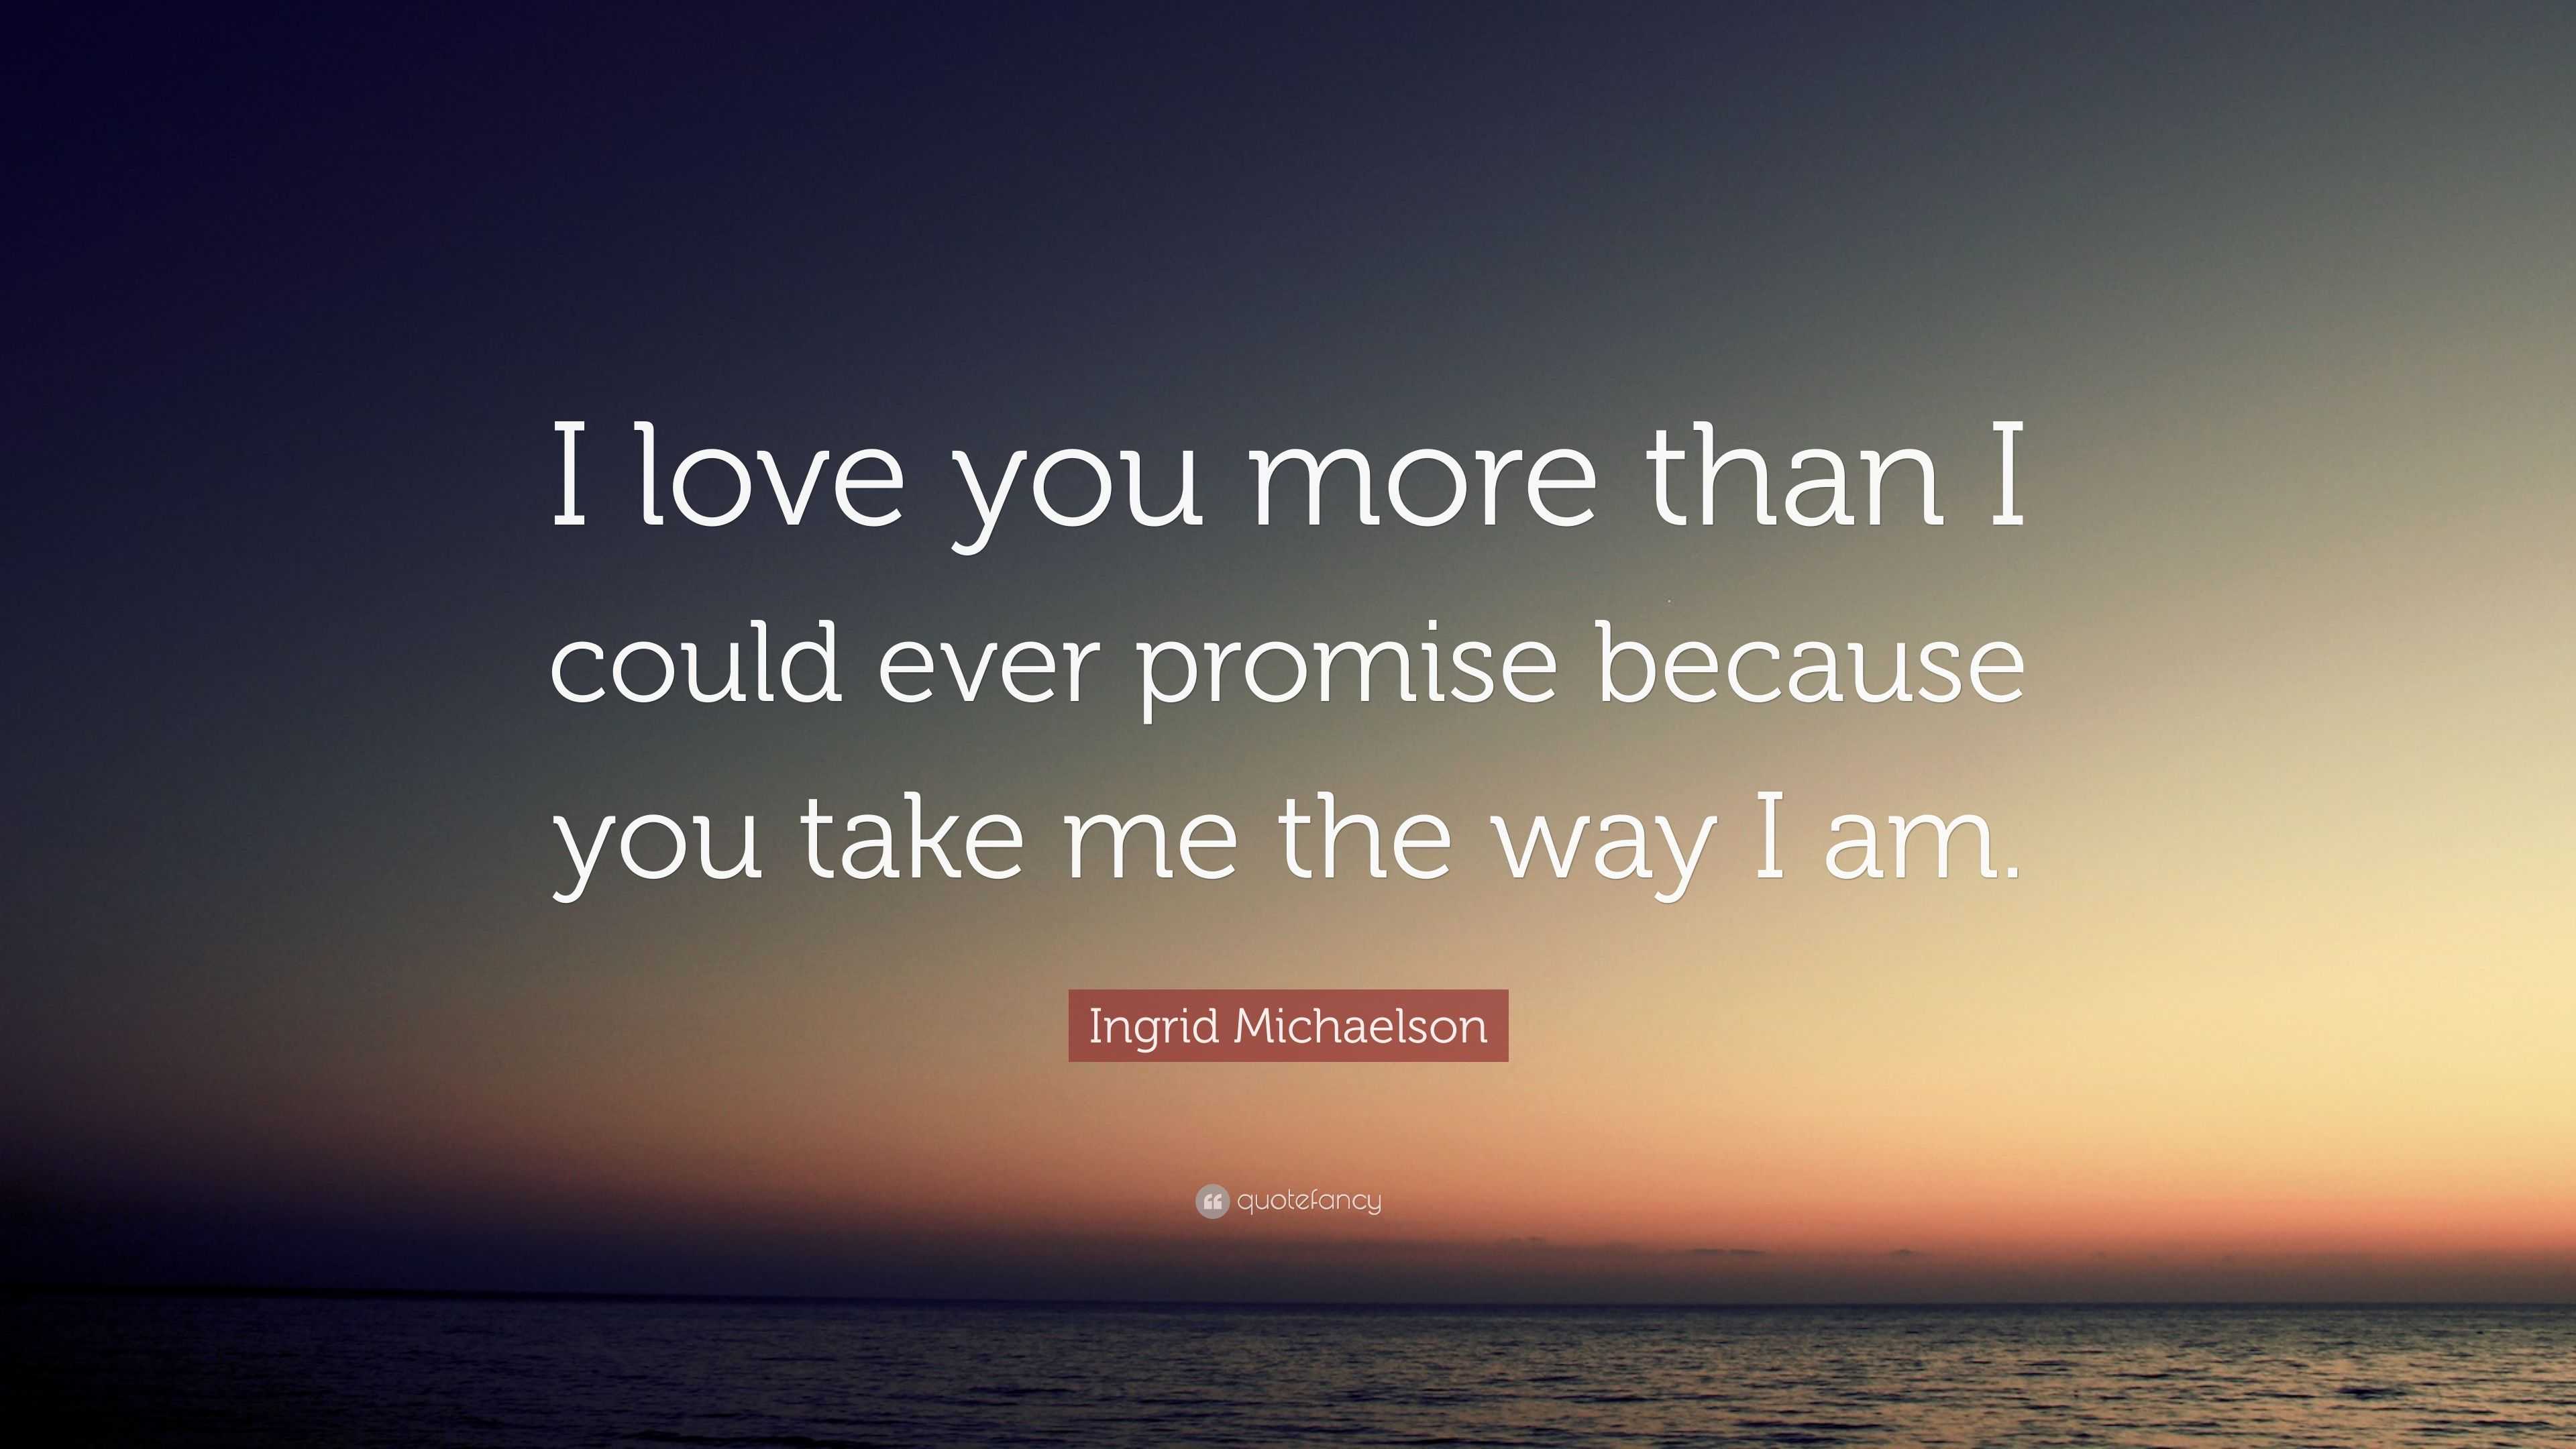 Ingrid Michaelson Quote: “I love you more than I could ever promise ...